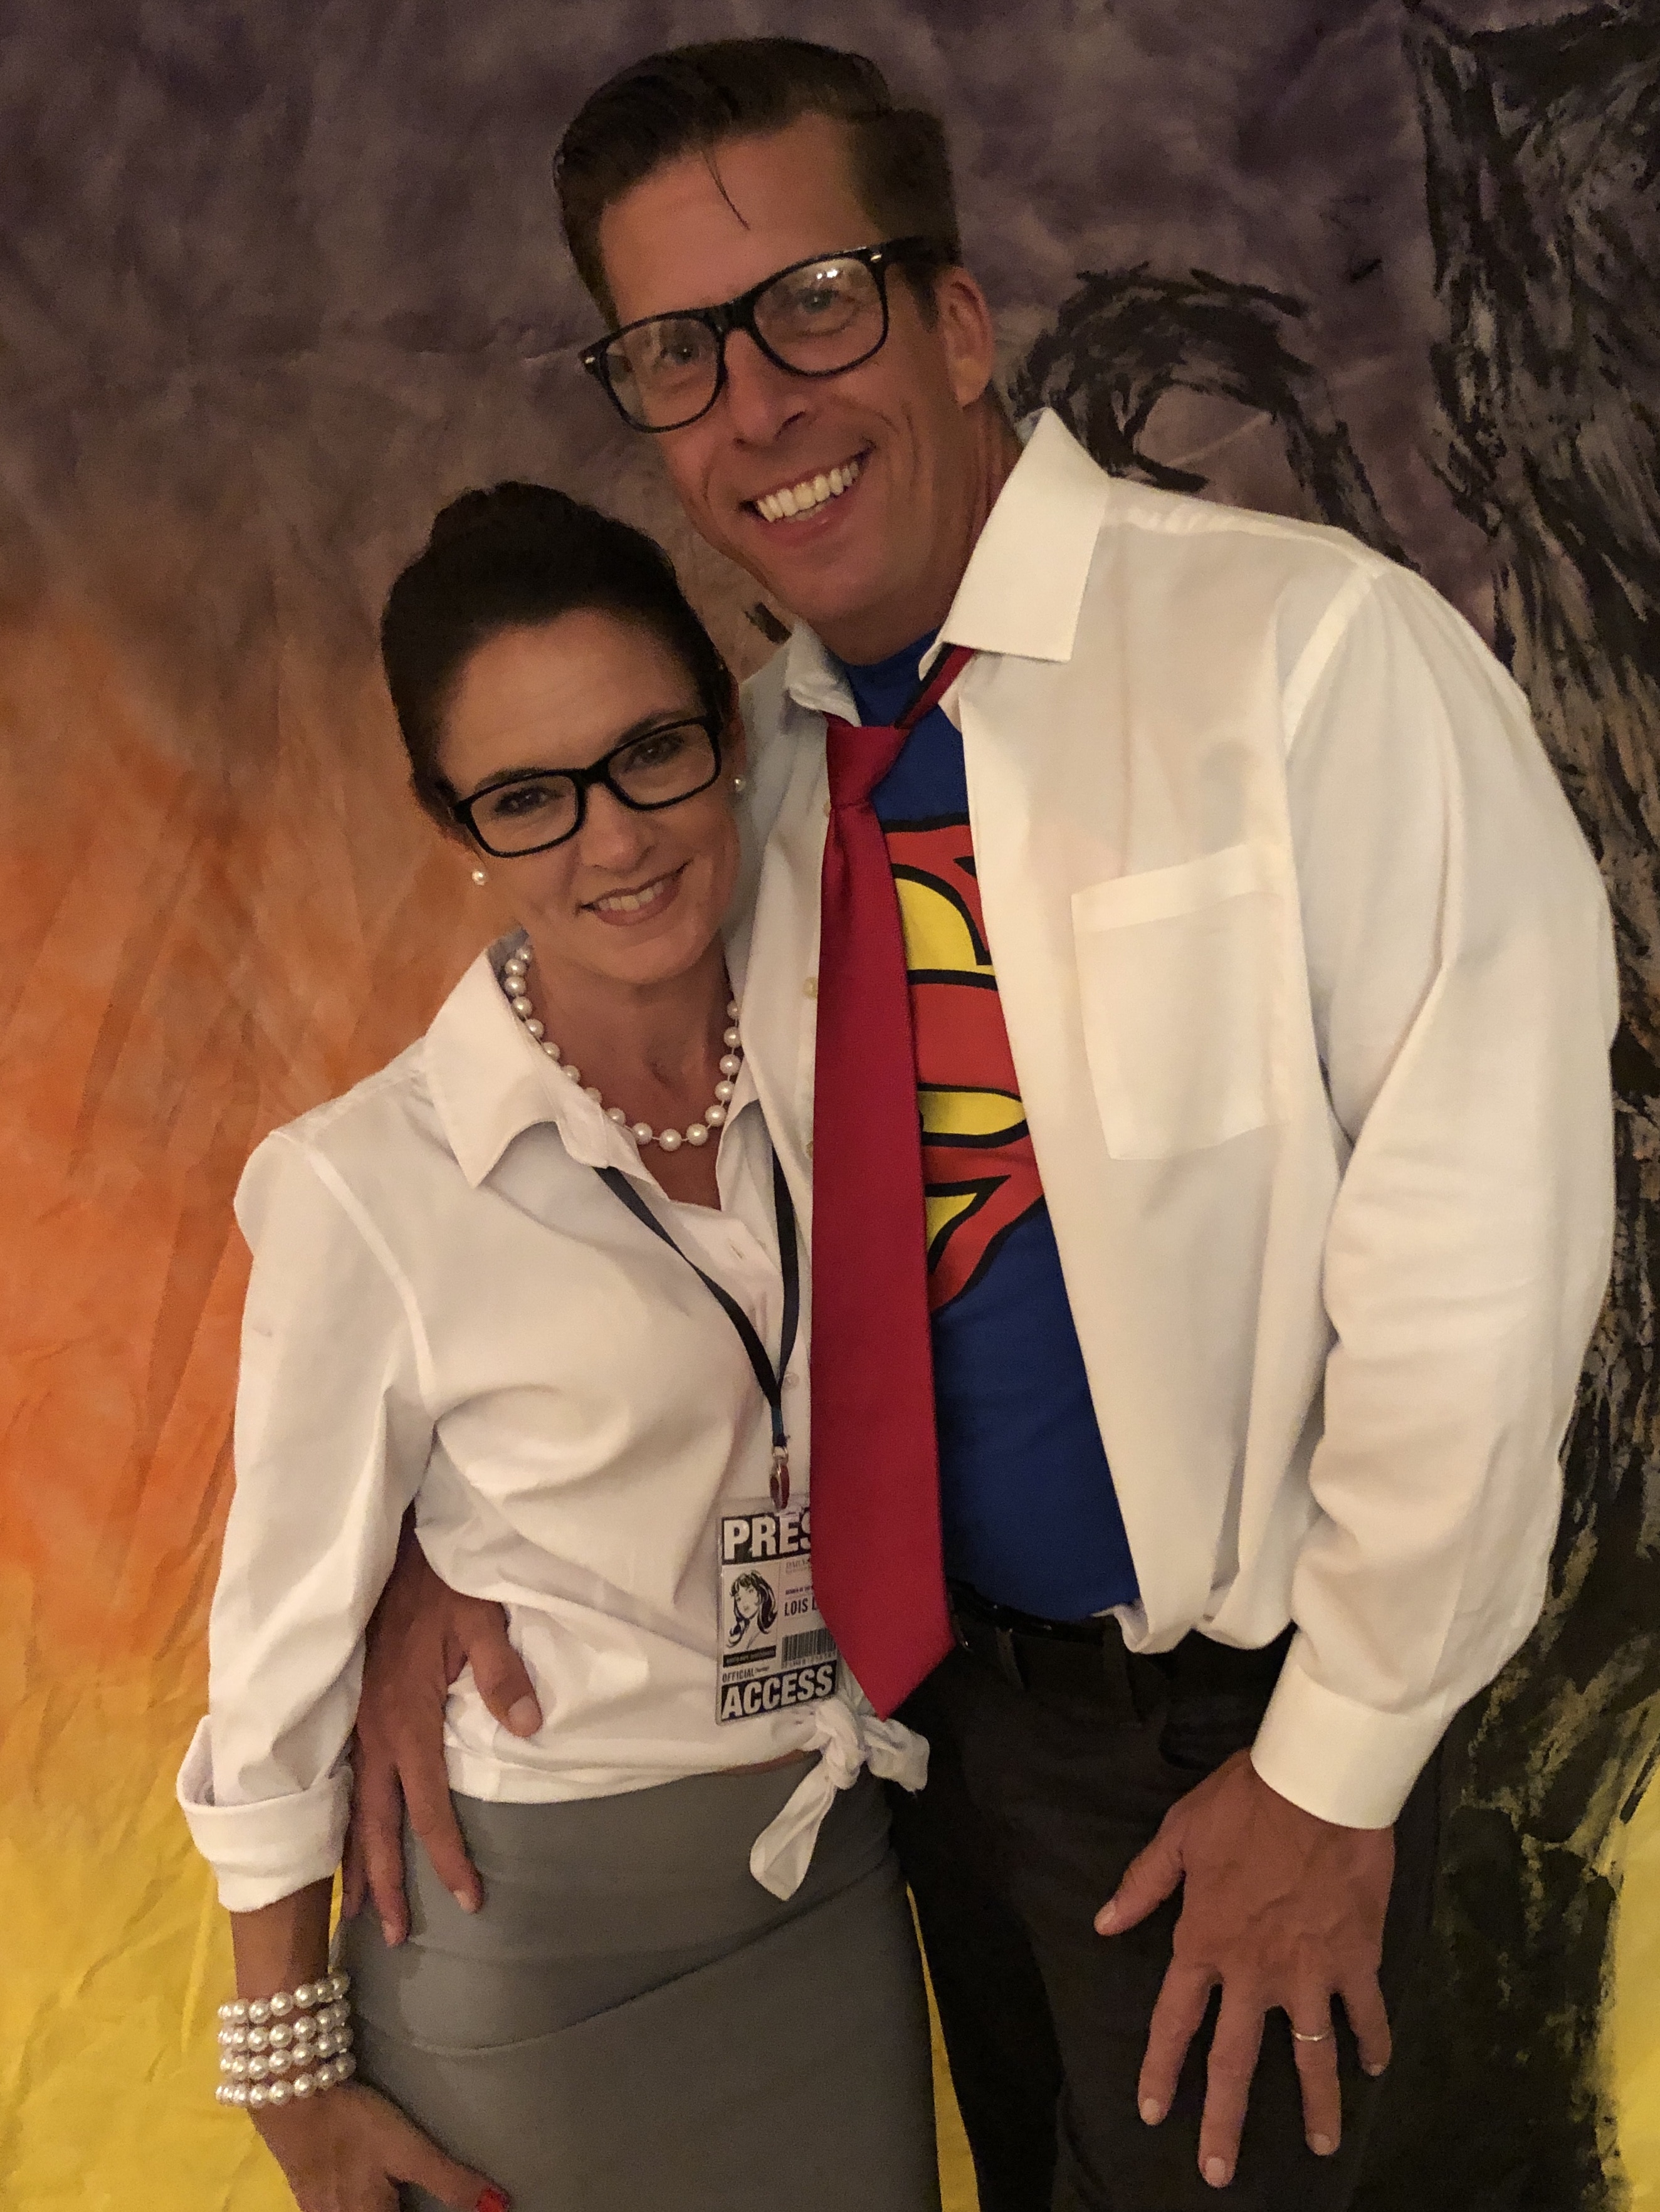 Man and woman dressed as Lois Lane and Clark Kent for Halloween 